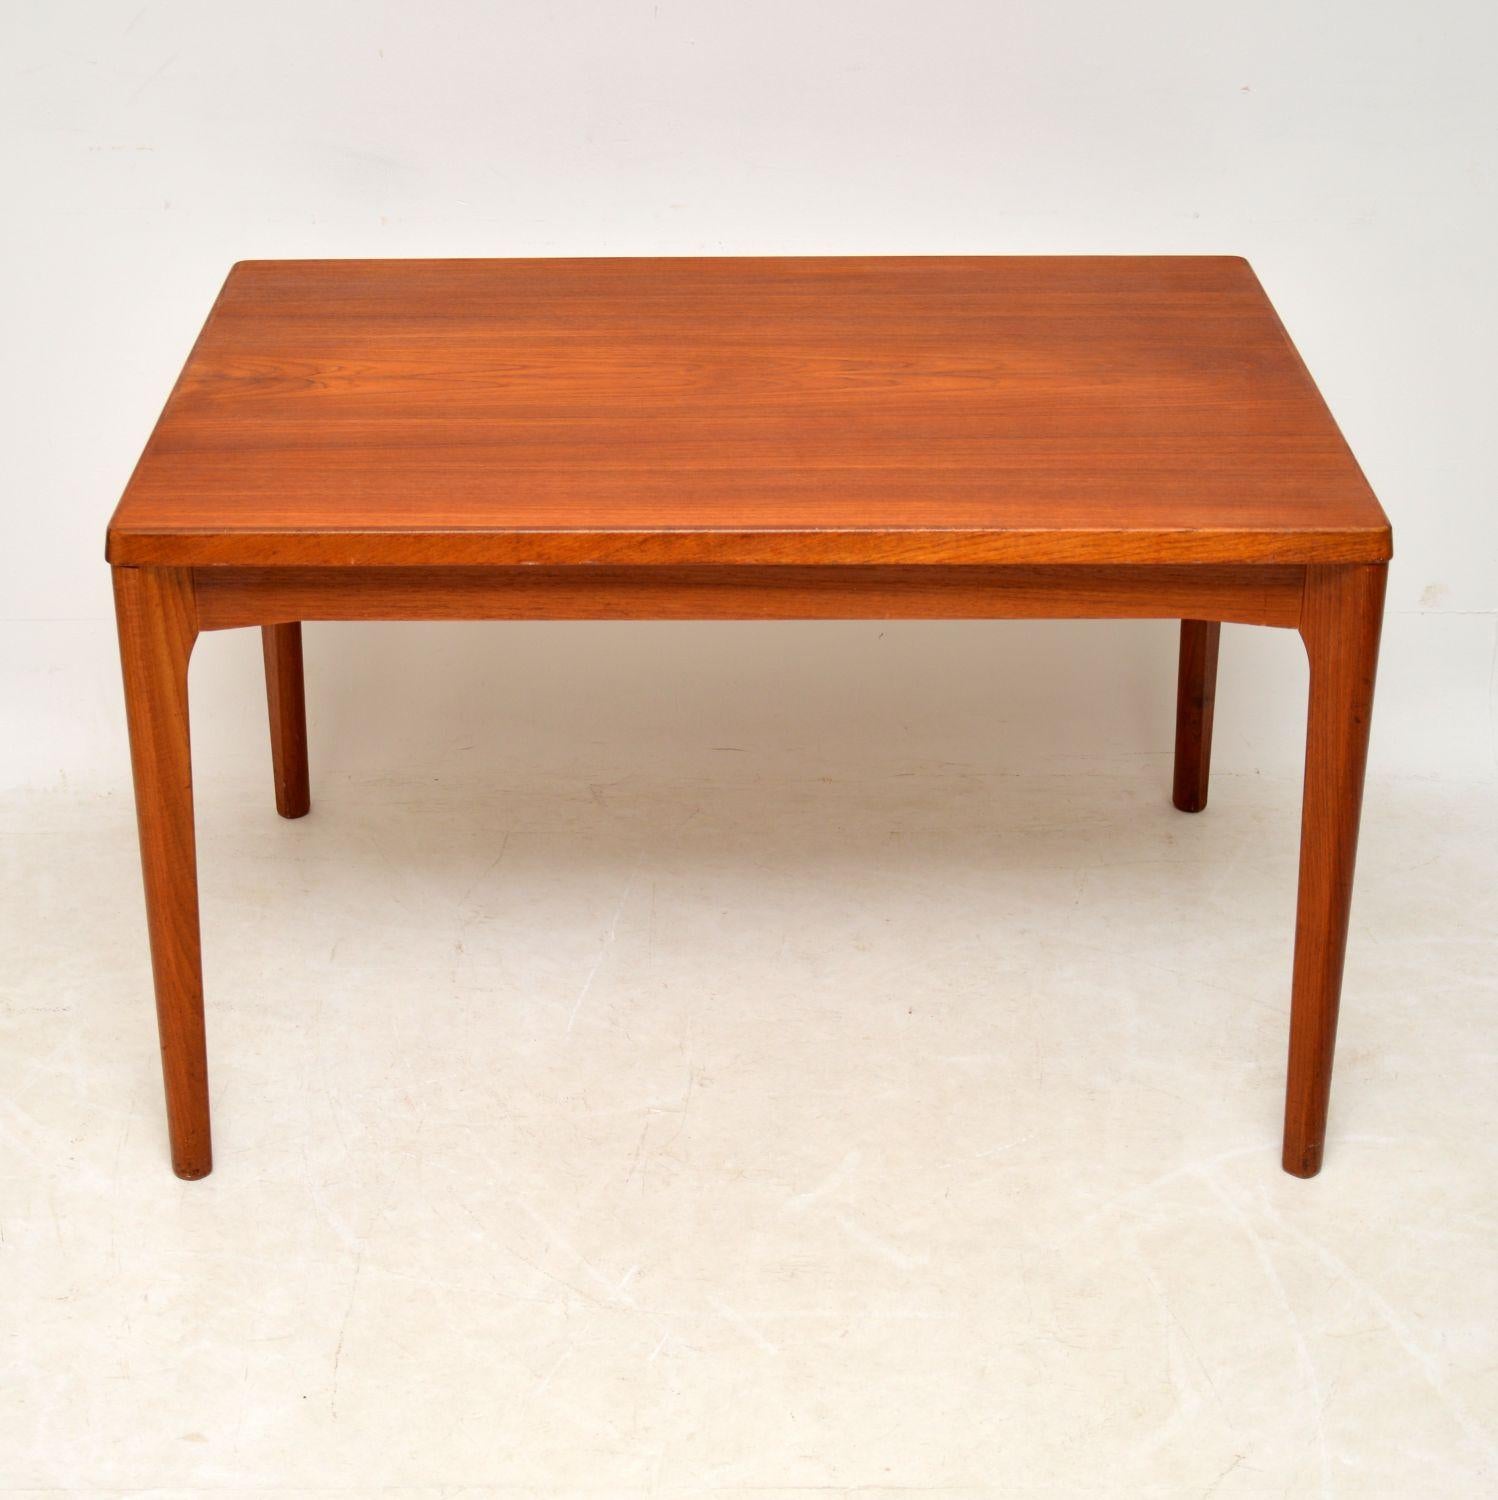 A stylish and very well made Danish vintage dining table in teak, this was designed by Henning Kjaernulf, it was made by Vejle Stole in the 1960s. This is in great condition for its age, with only some incredibly minor wear to be seen. This can be